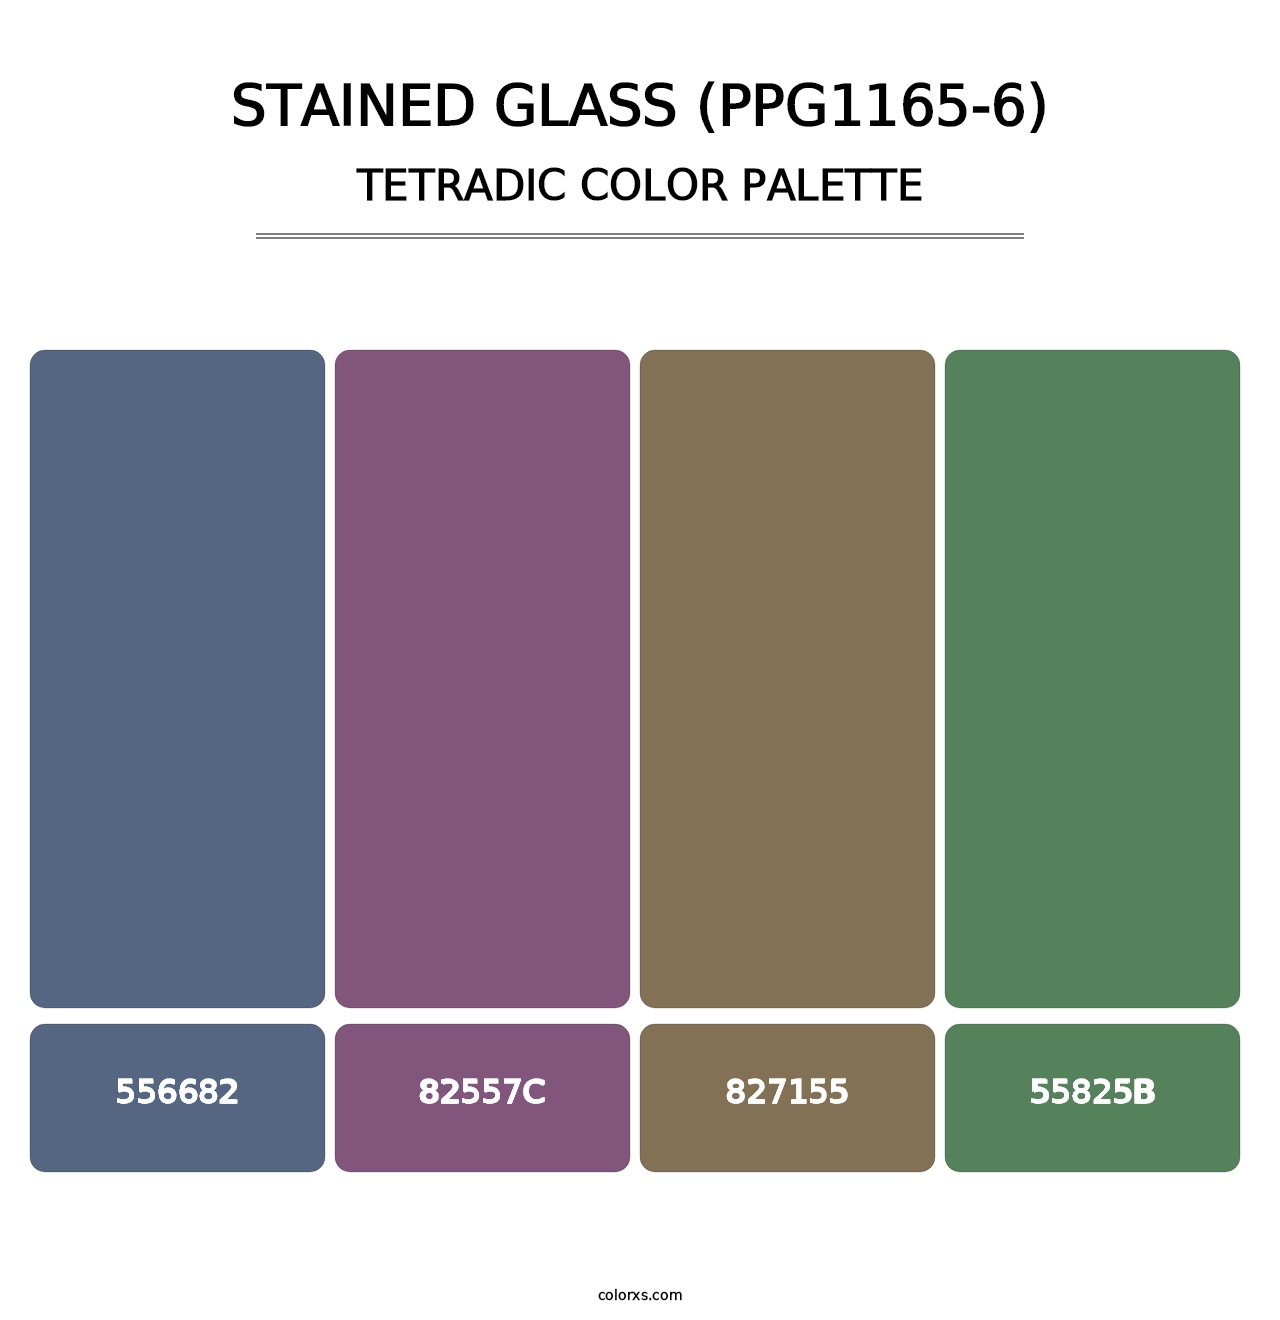 Stained Glass (PPG1165-6) - Tetradic Color Palette